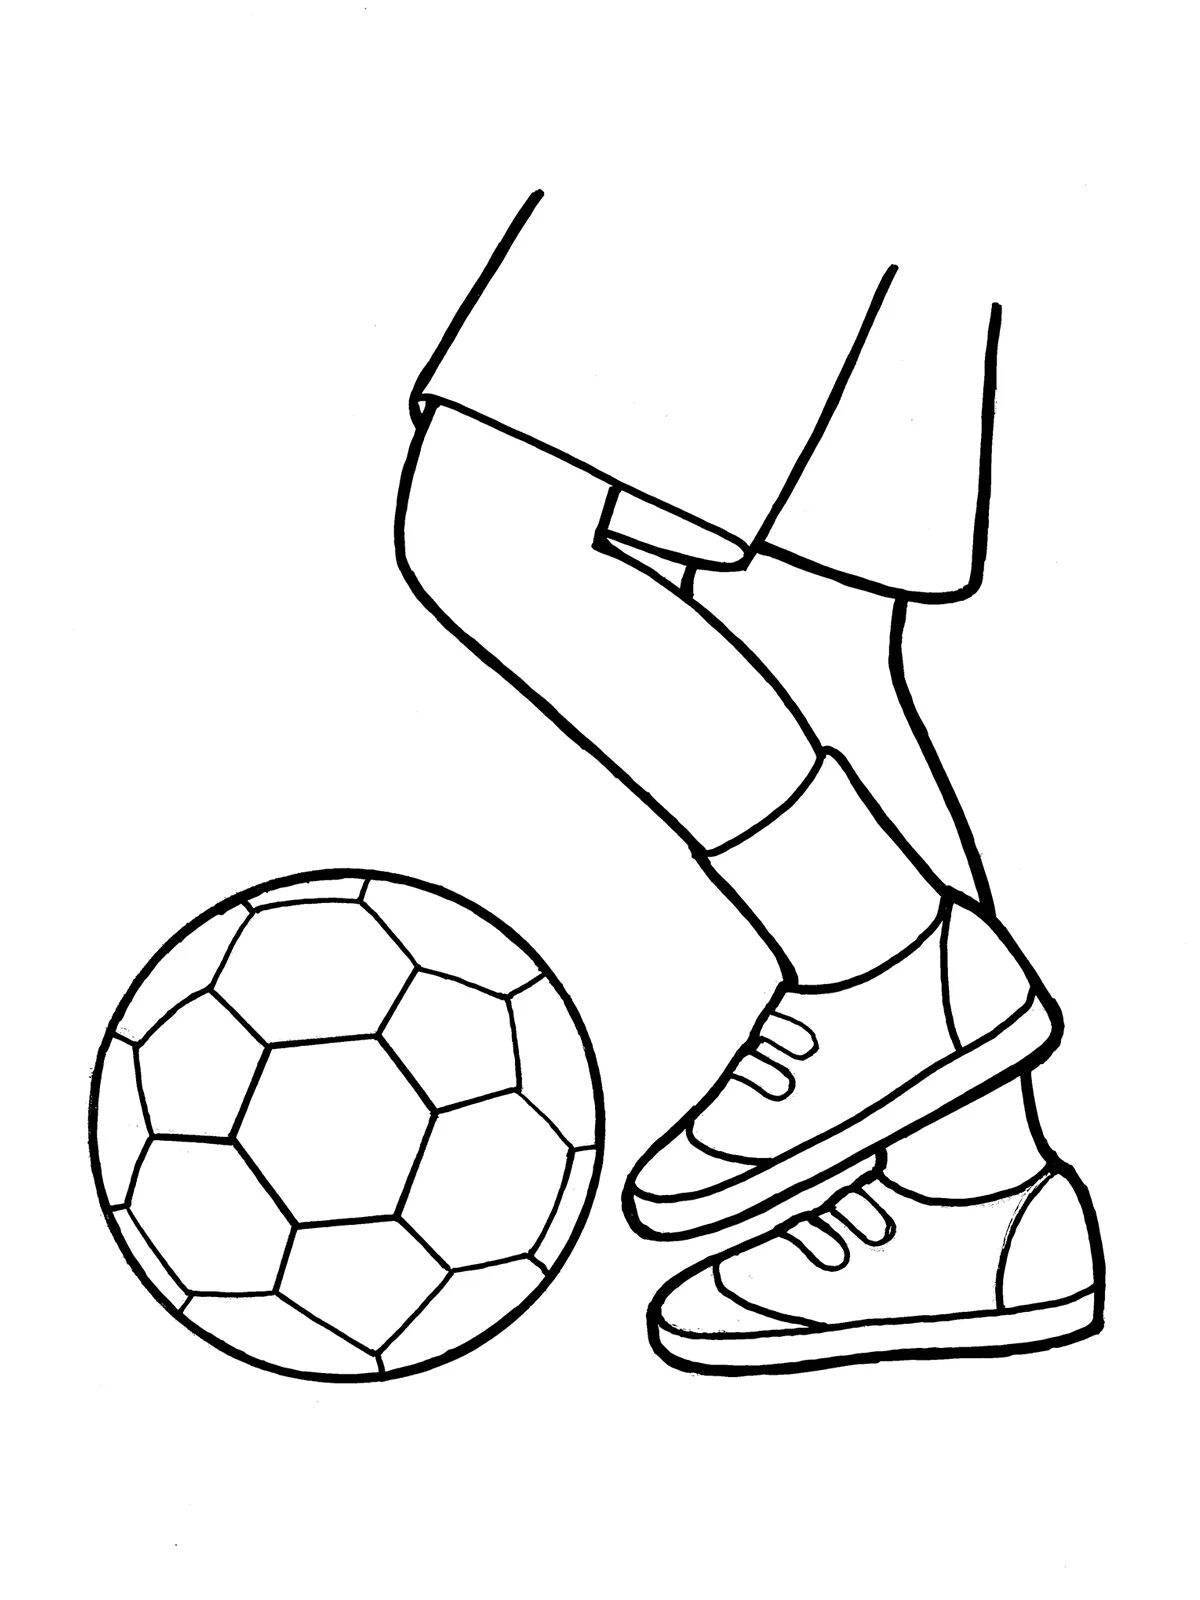 Coloring page shiny football boots